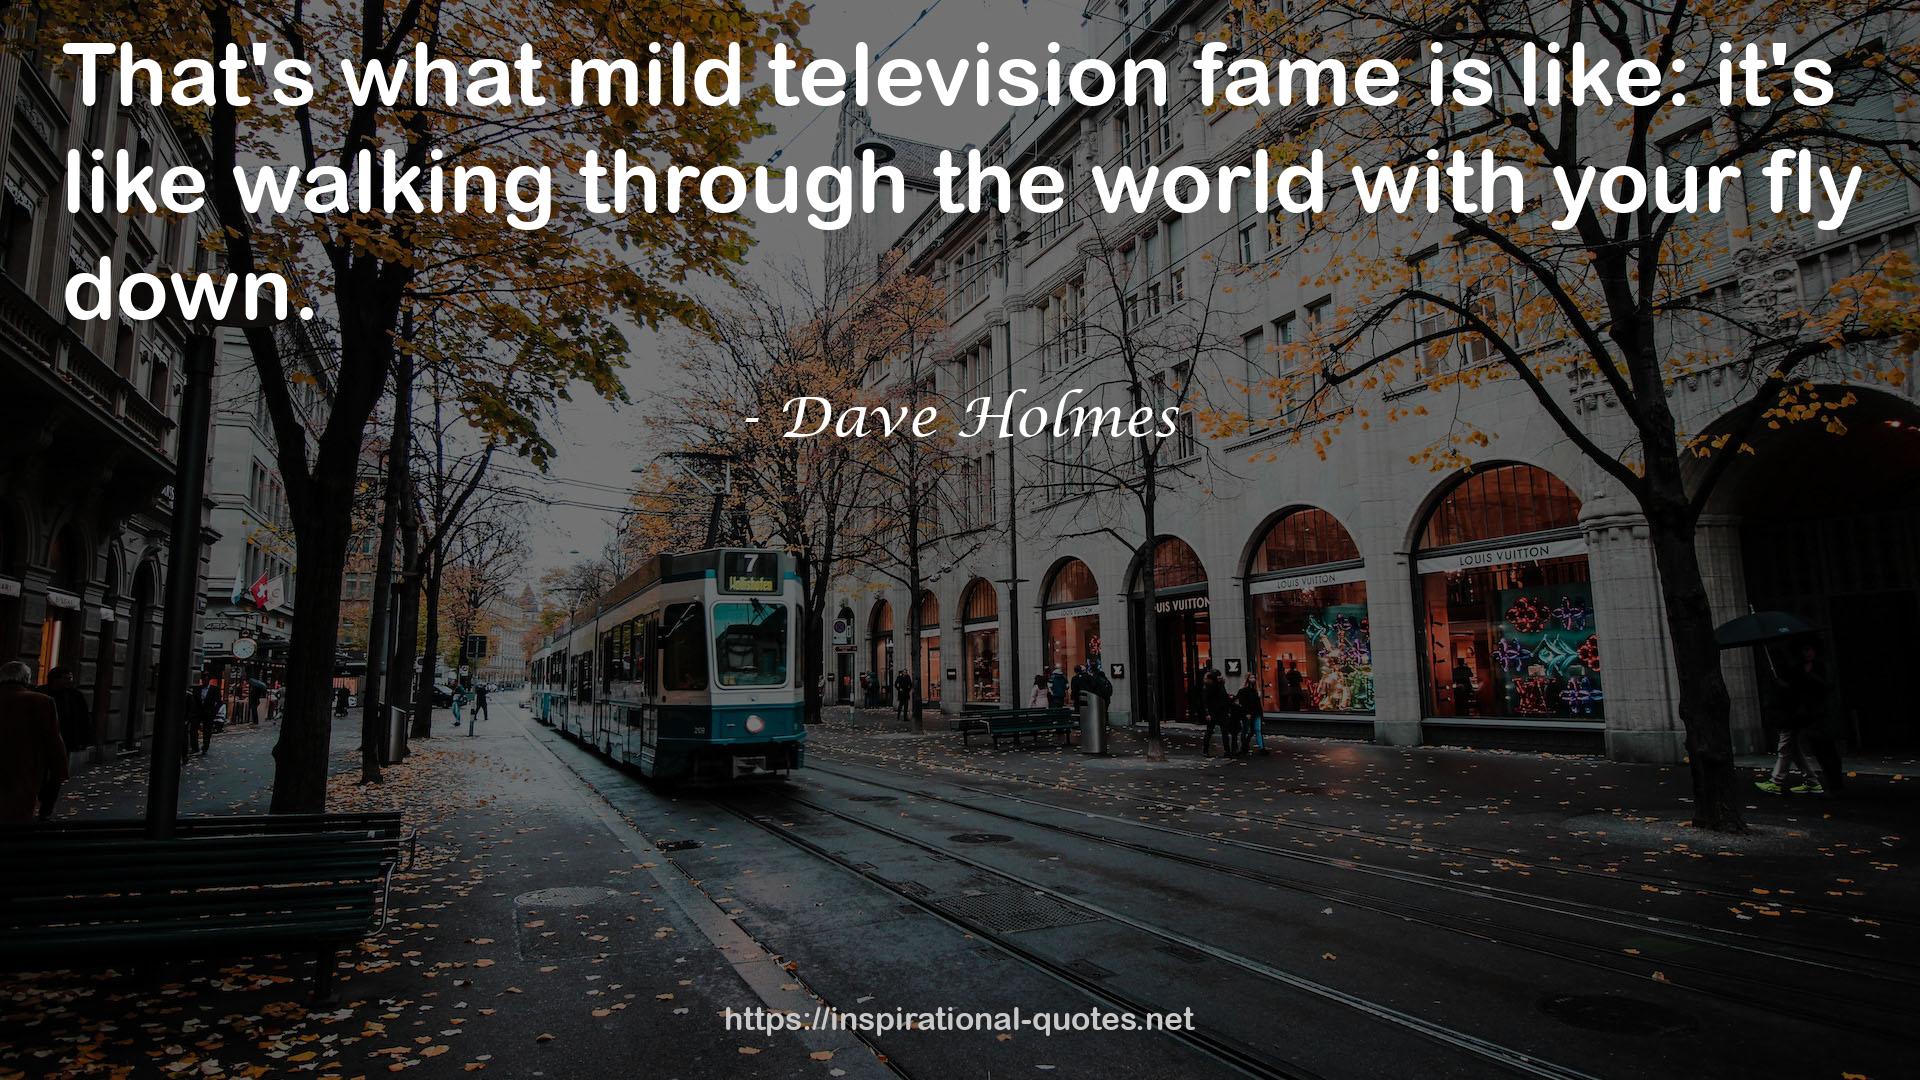 Dave Holmes QUOTES